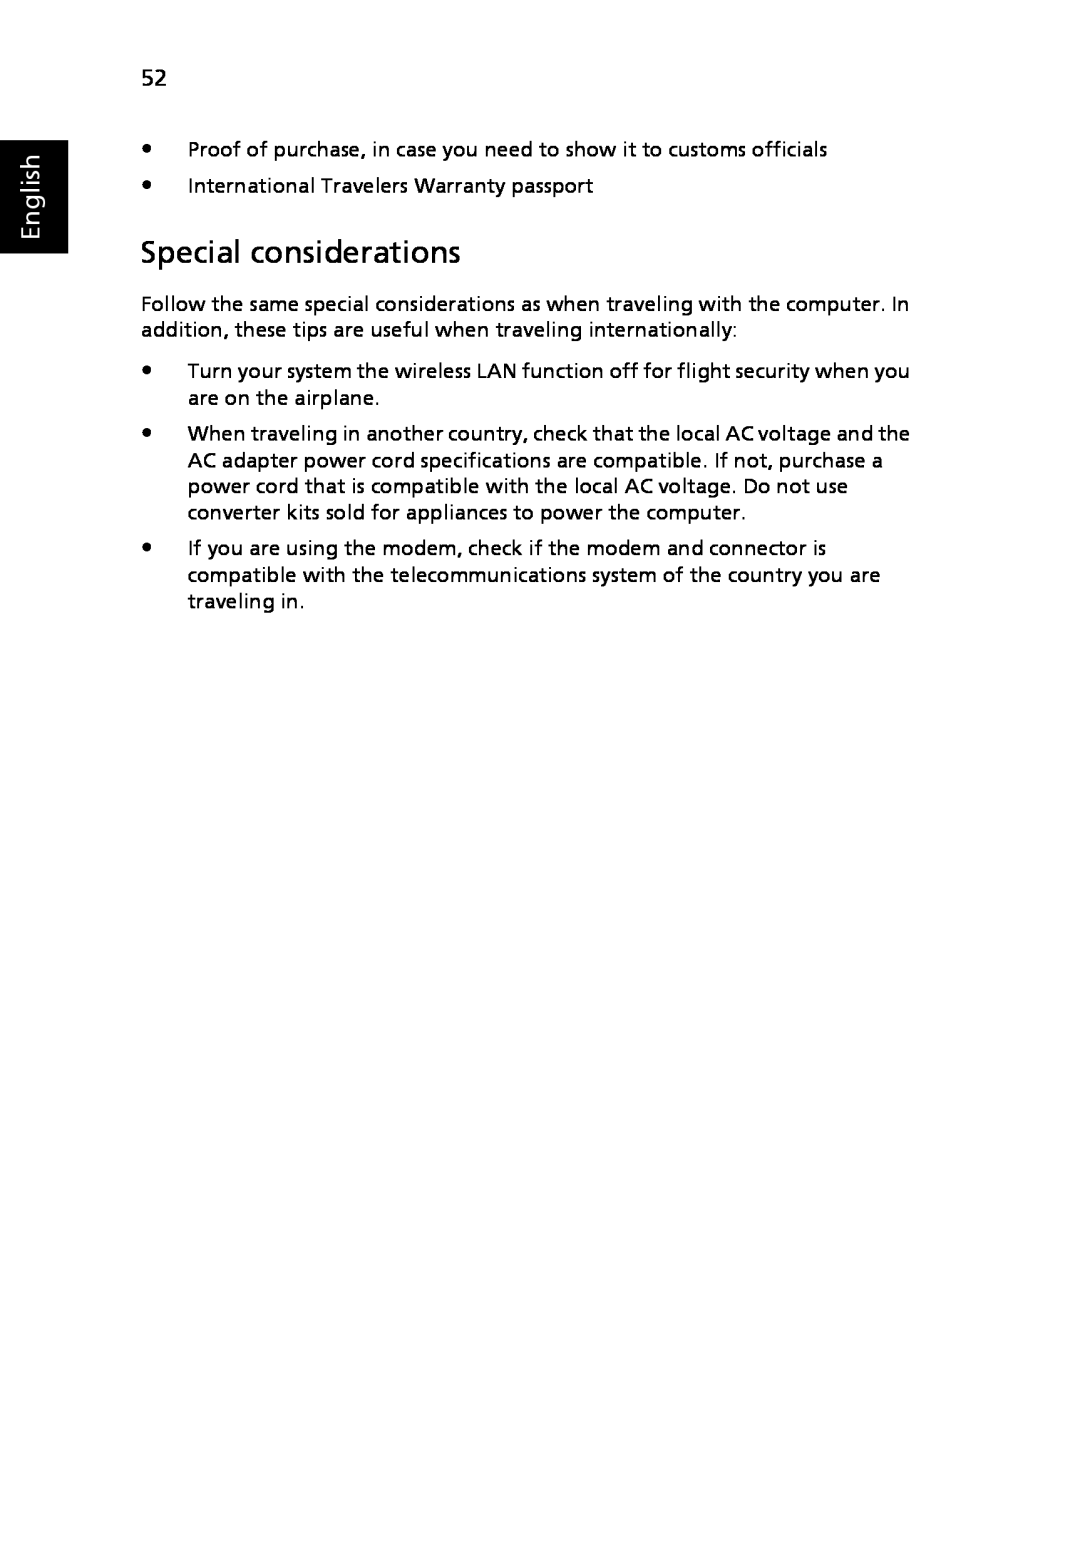 Acer 6492G manual Special considerations, English, Proof of purchase, in case you need to show it to customs officials 